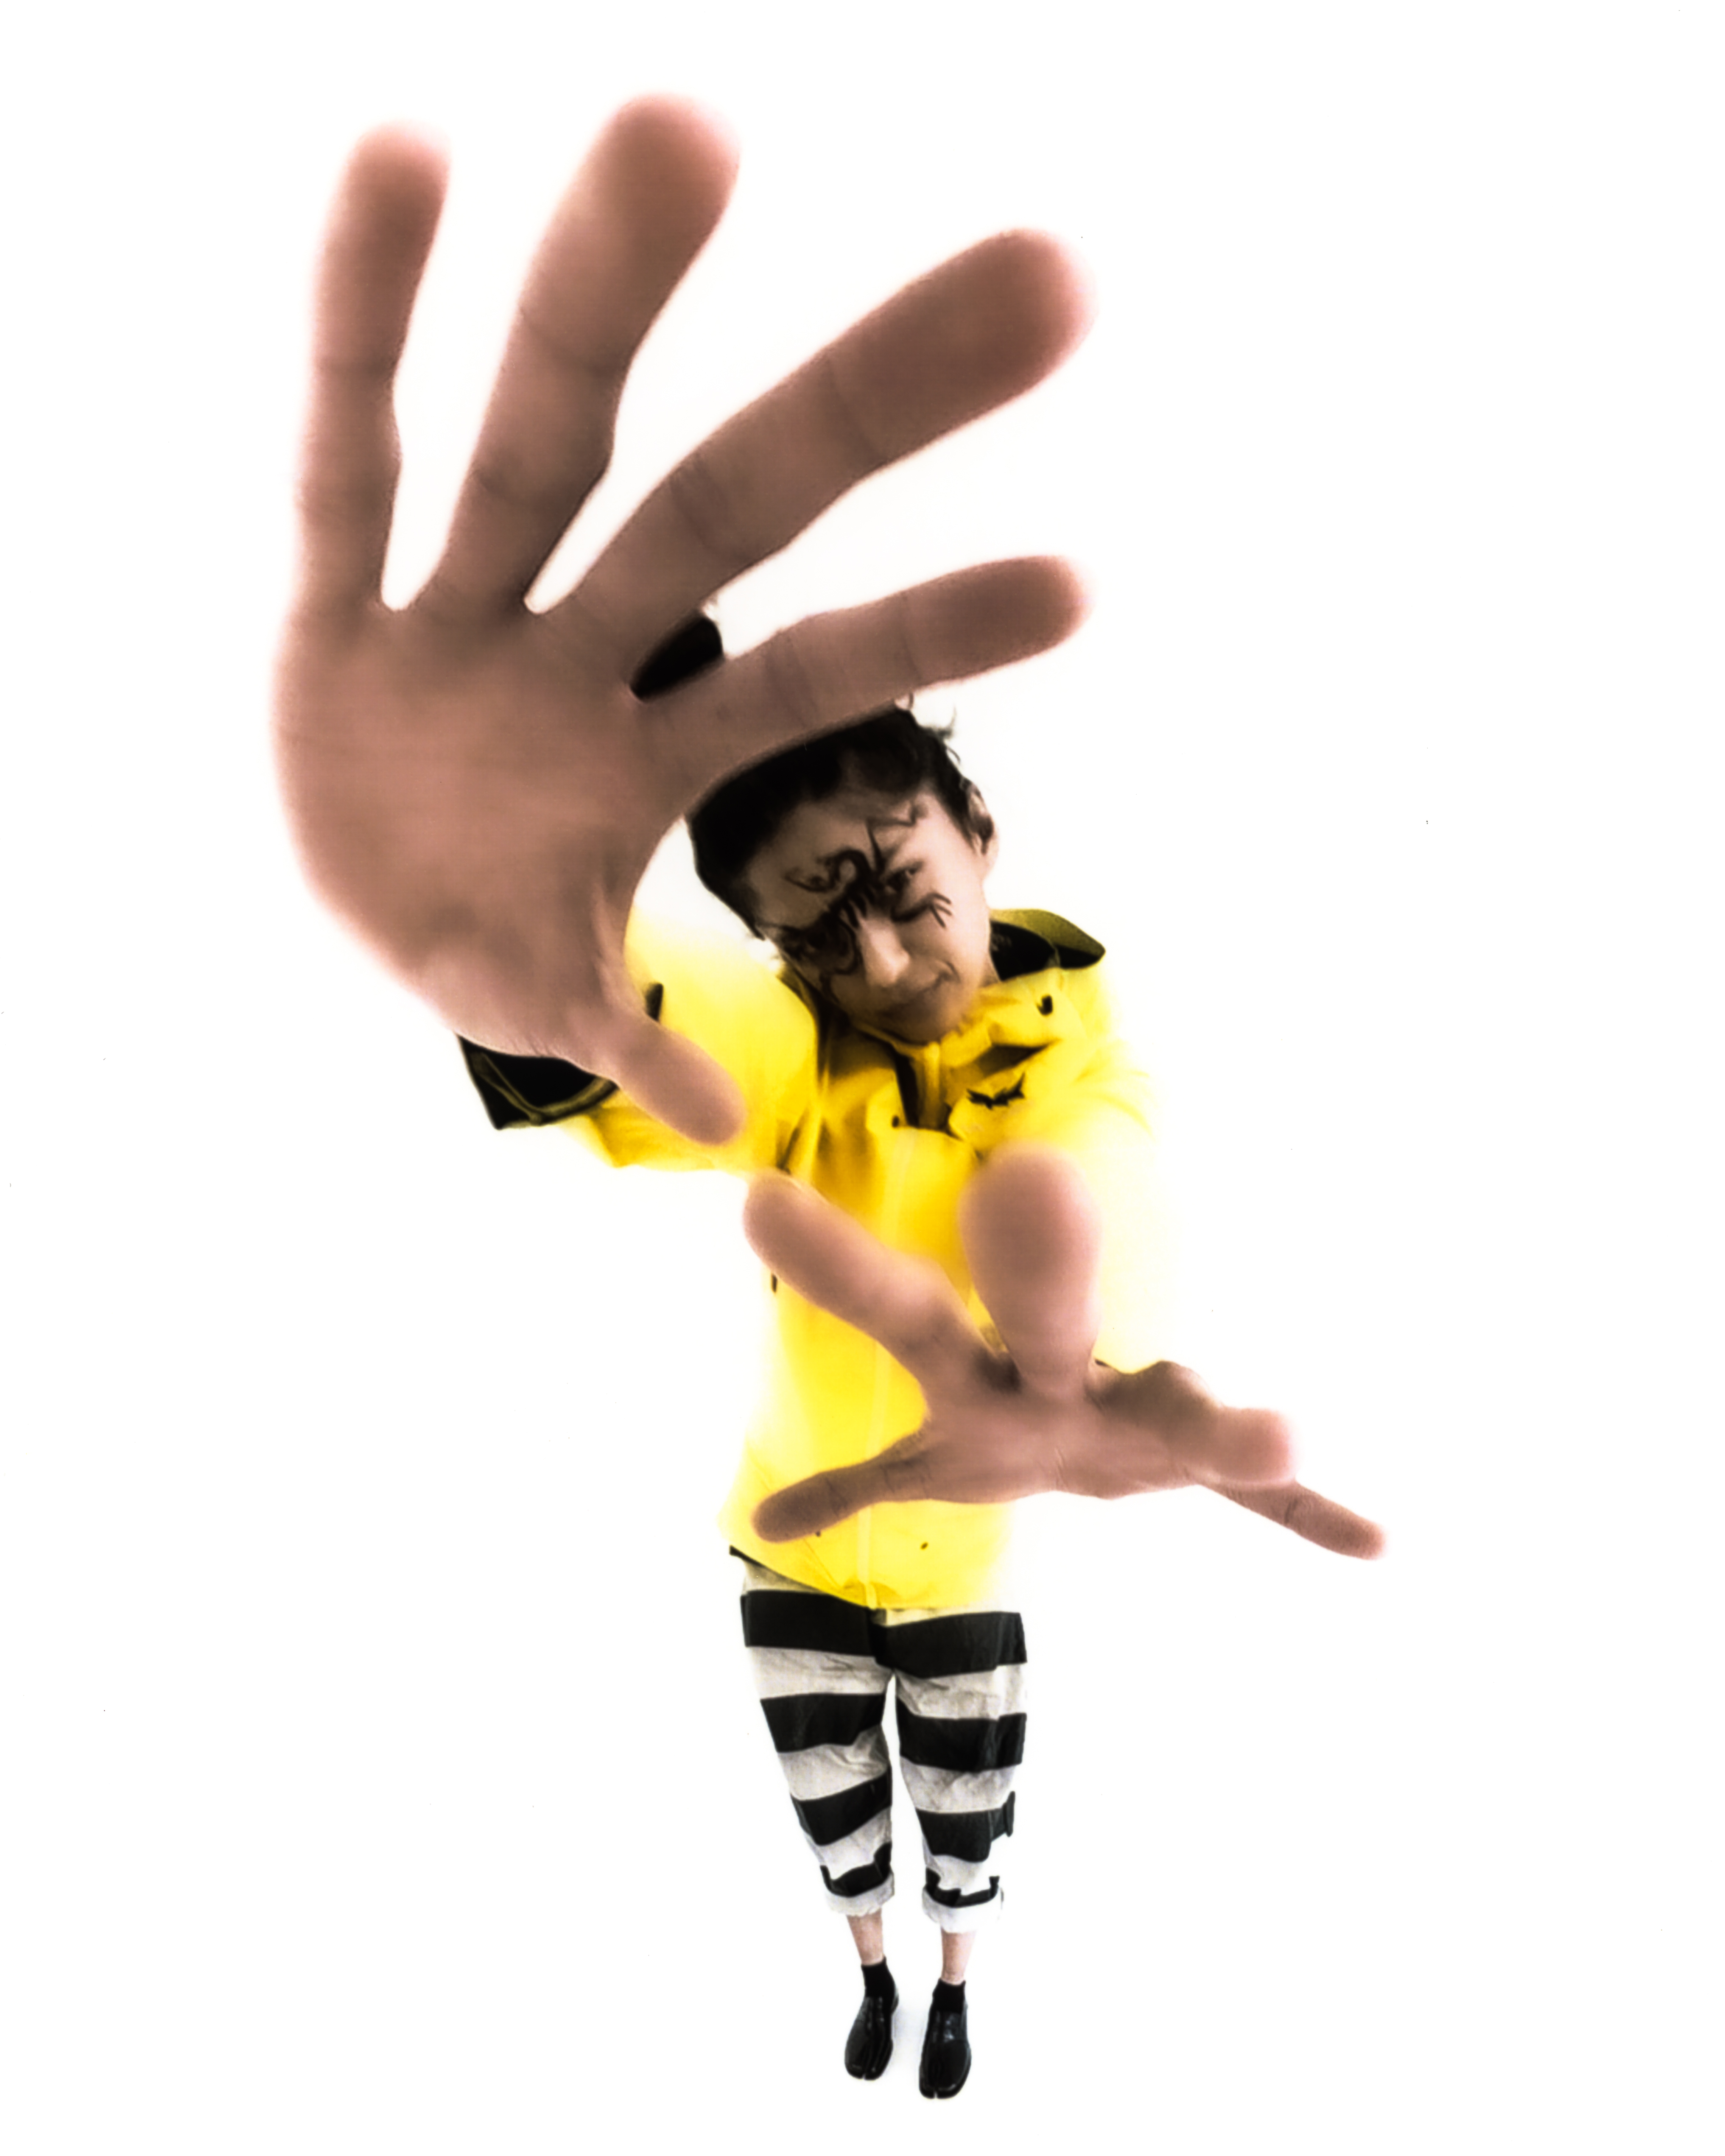 Warped image of a model with her hands facing the camera in a yellow raincoat